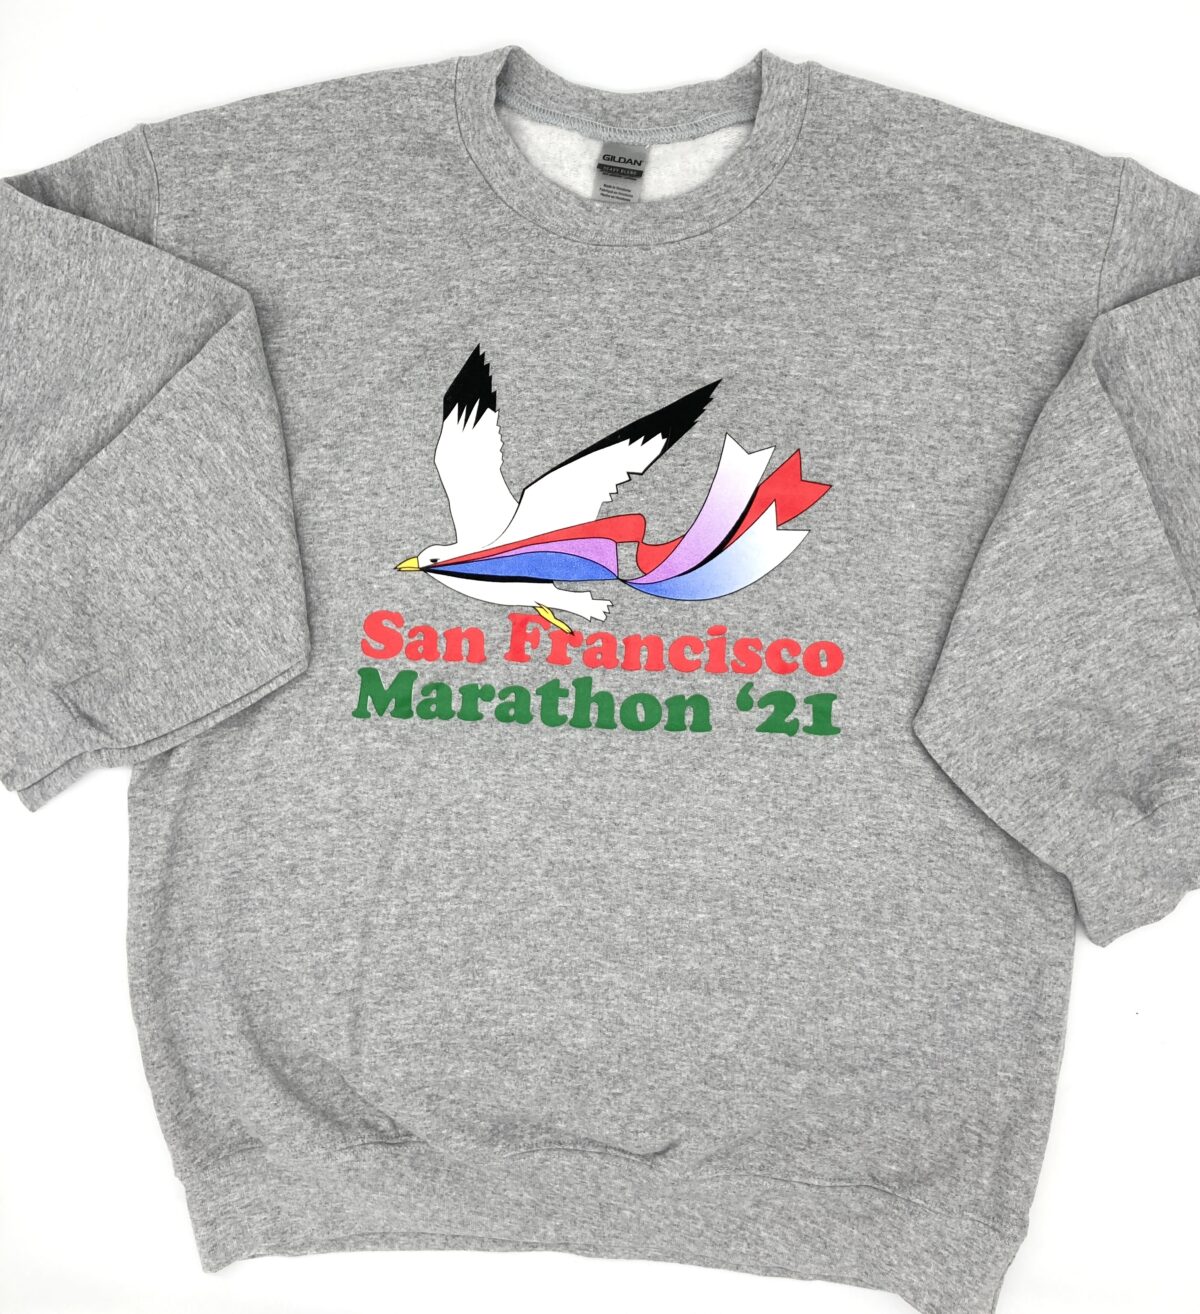 Front detail of the San Francisco Marathon 80's vintage inspired crewneck sweatshirt depicting a seagull flying with a band of colored ribbons in its beak.